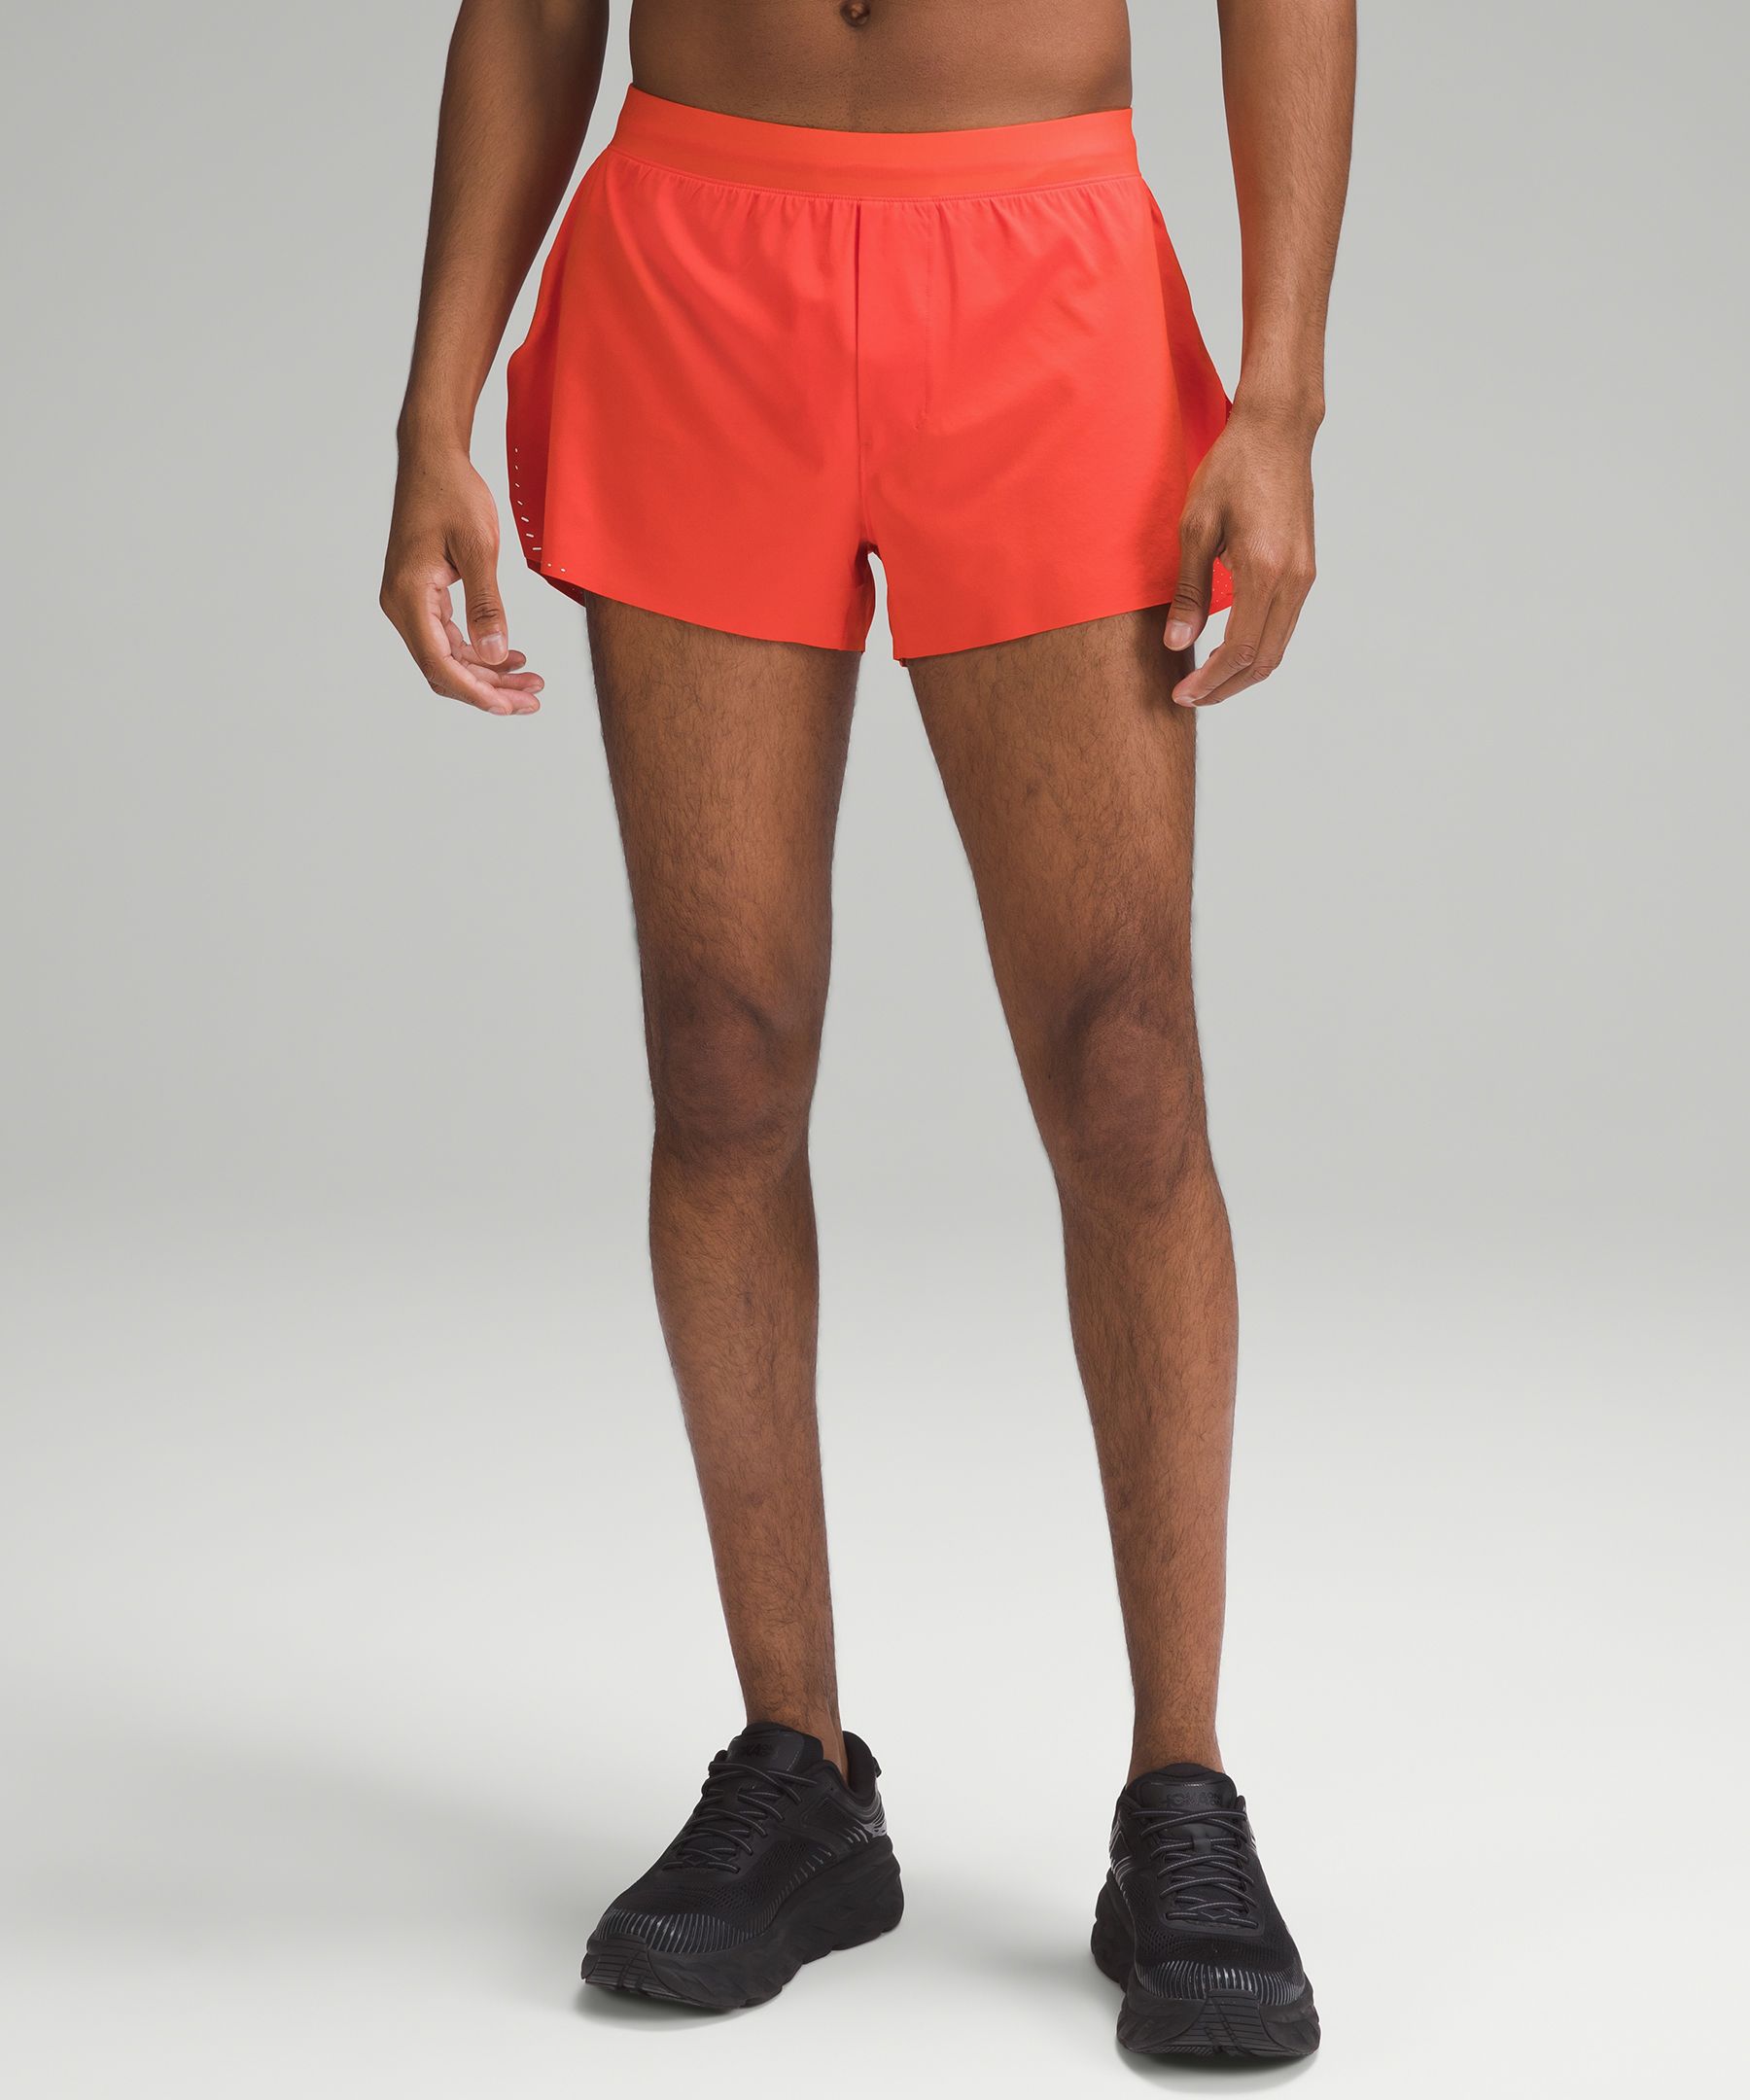 lululemon athletica Fast And Free Reflective Shorts - 3 - Color